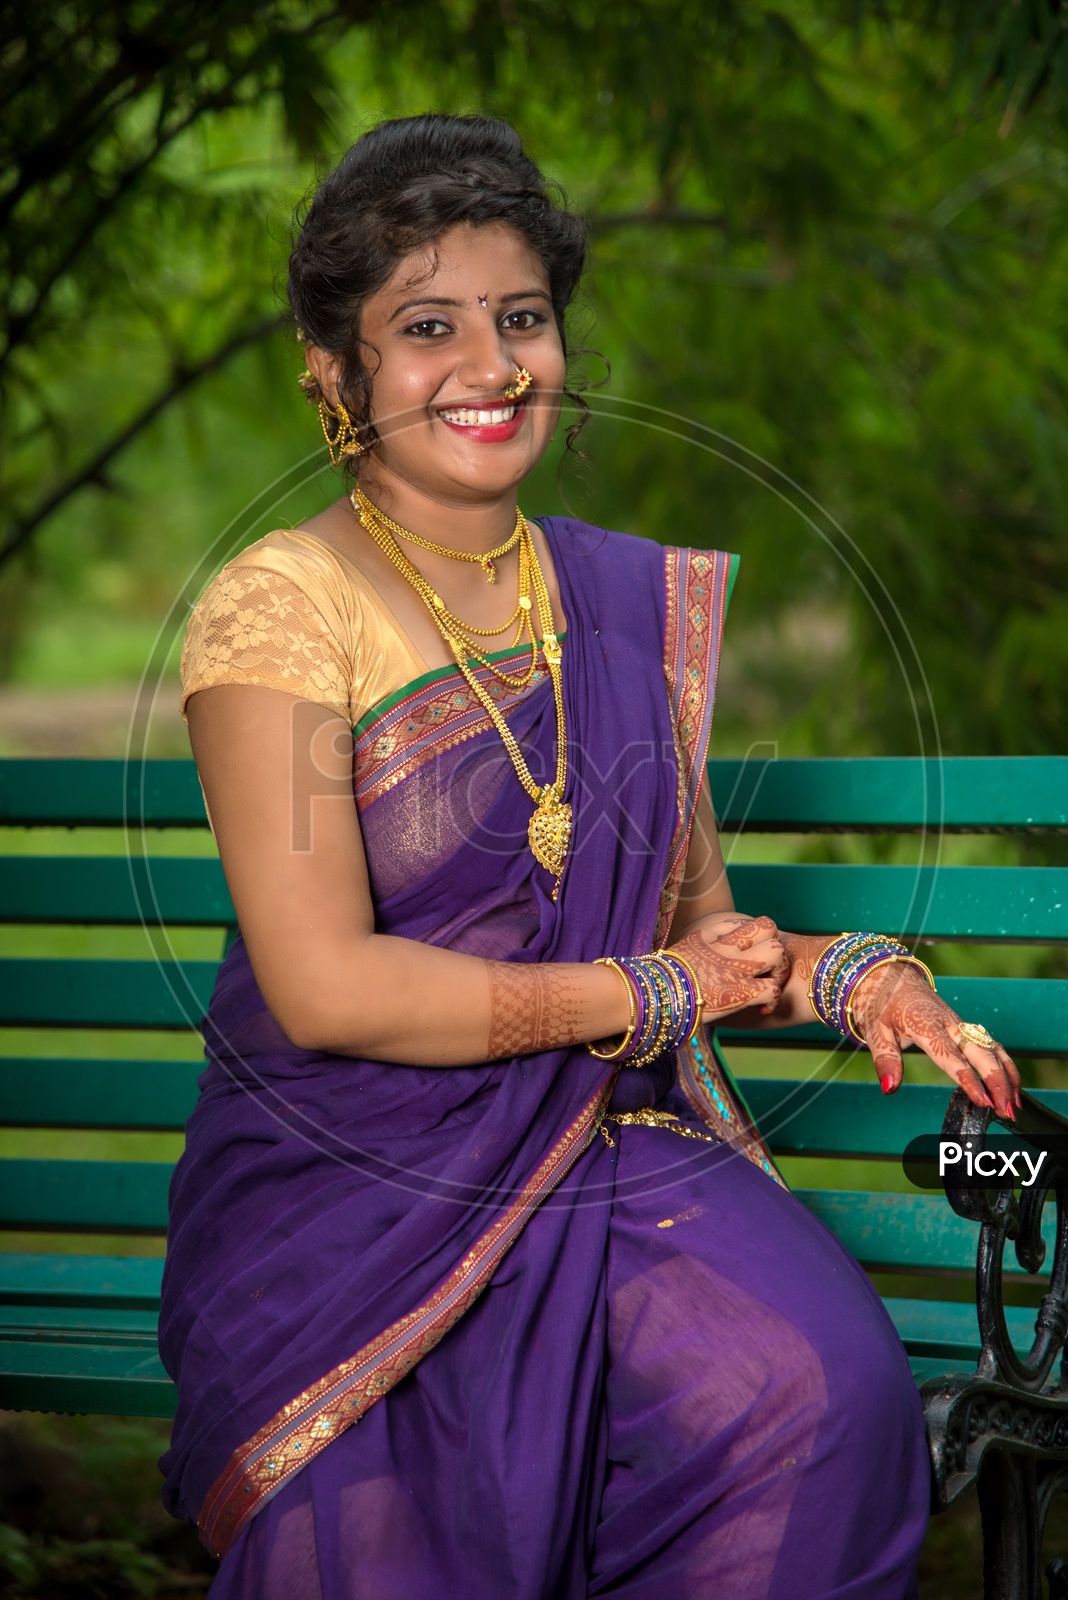 Image of young Indian Girl Posing outdoor with Nature  Background-KN681471-Picxy